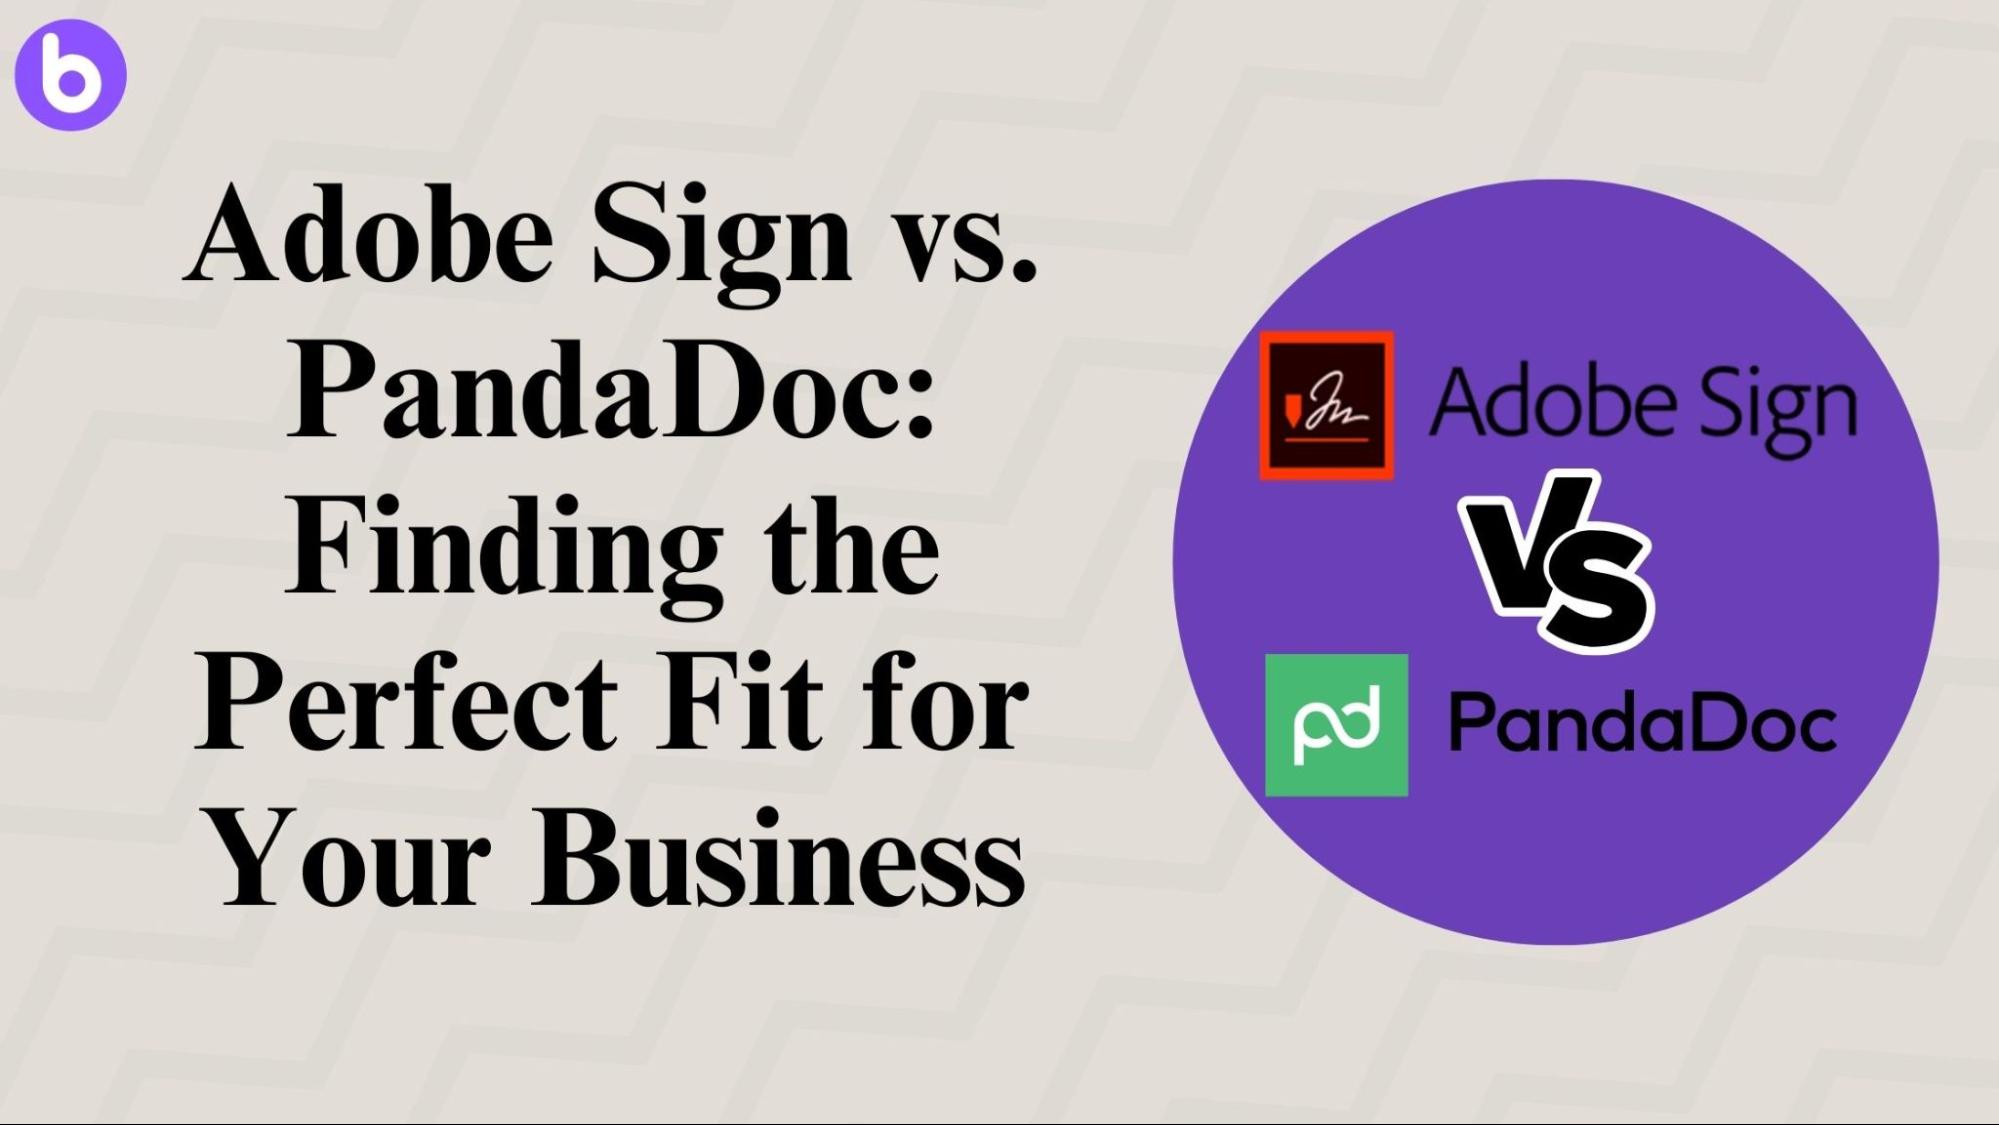 Adobe Sign vs. PandaDoc: Finding the Perfect Fit for Your Business